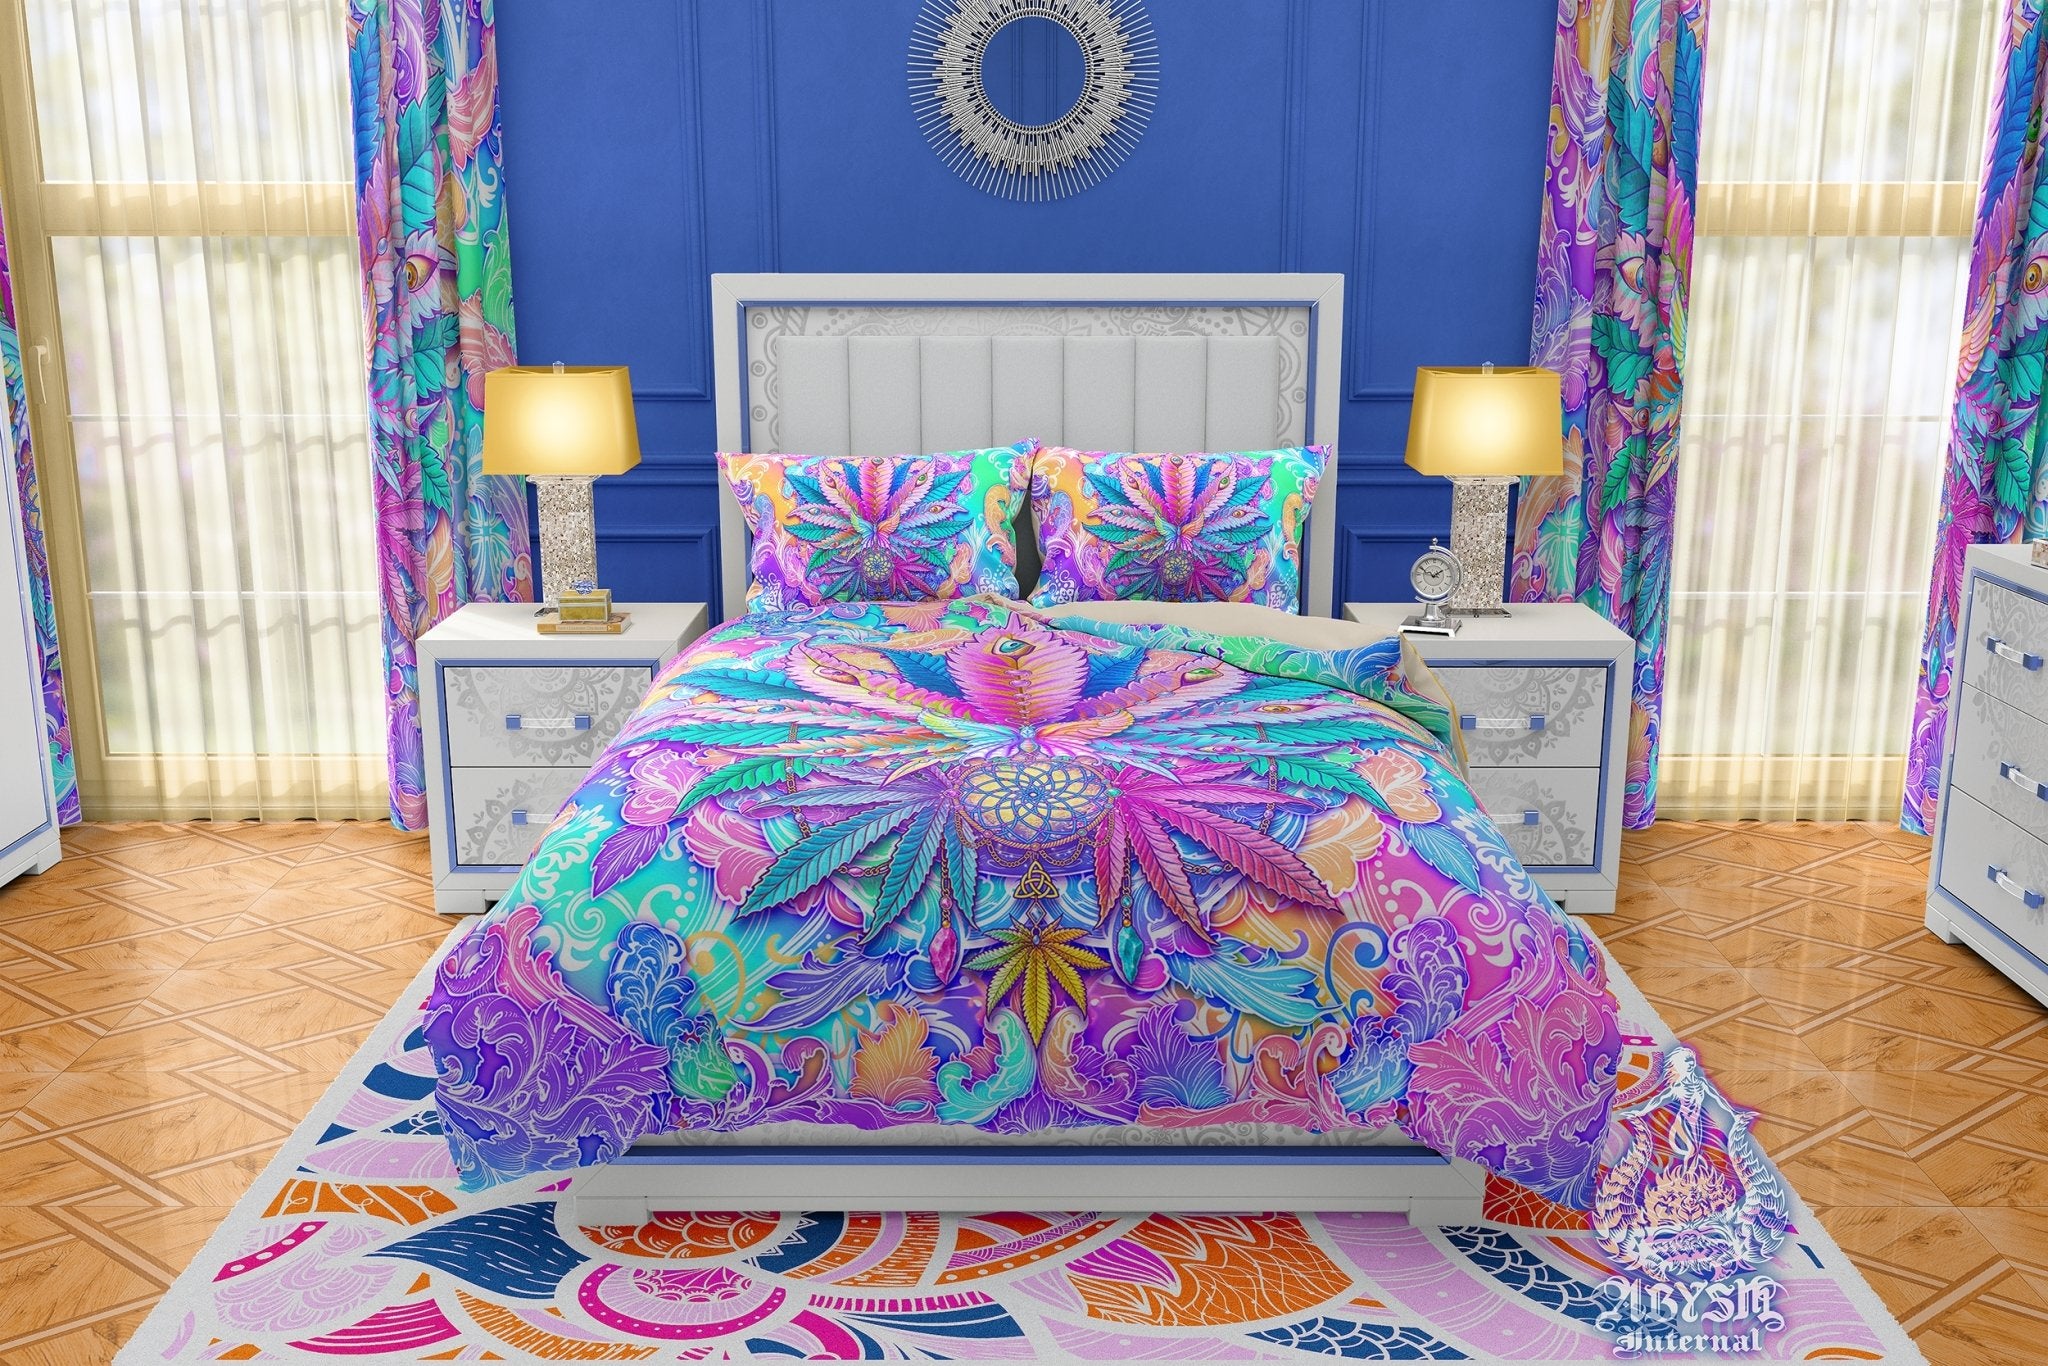 Weed Bedding Set, Comforter and Duvet, Aesthetic Bed Cover, Psychedelic Girl Bedroom Decor, King, Queen and Twin Size, 420 Cannabis Room Art - Marijuana Pastel - Abysm Internal